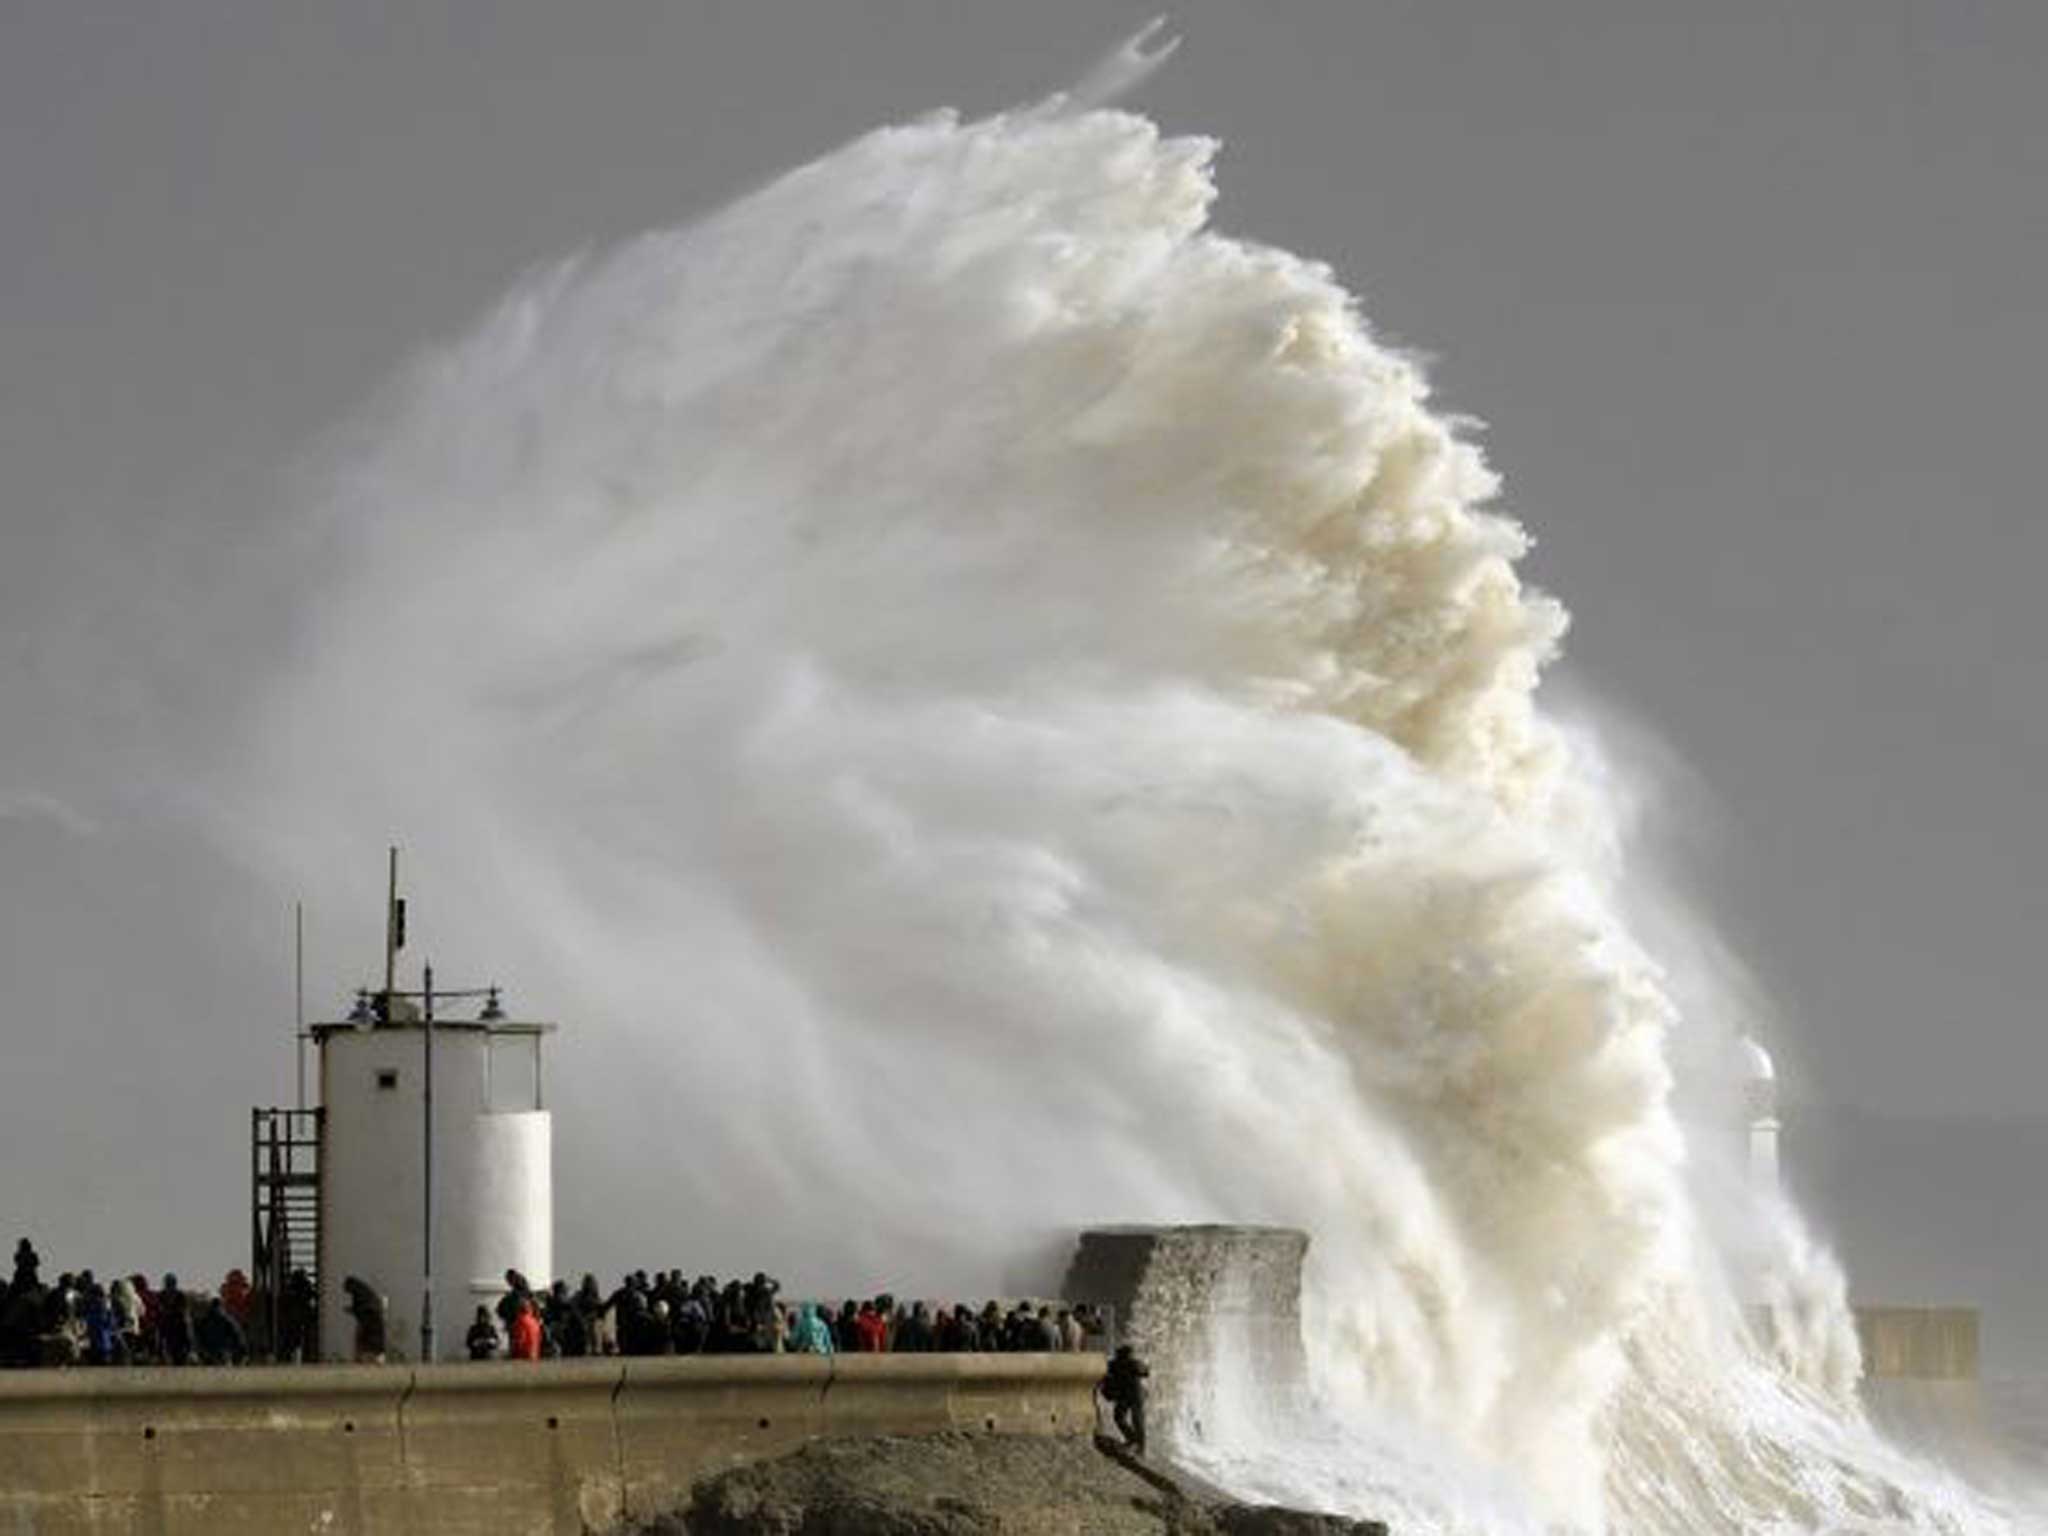 In danger: Bystanders in Porthcawl, South Wales, watch the giant waves